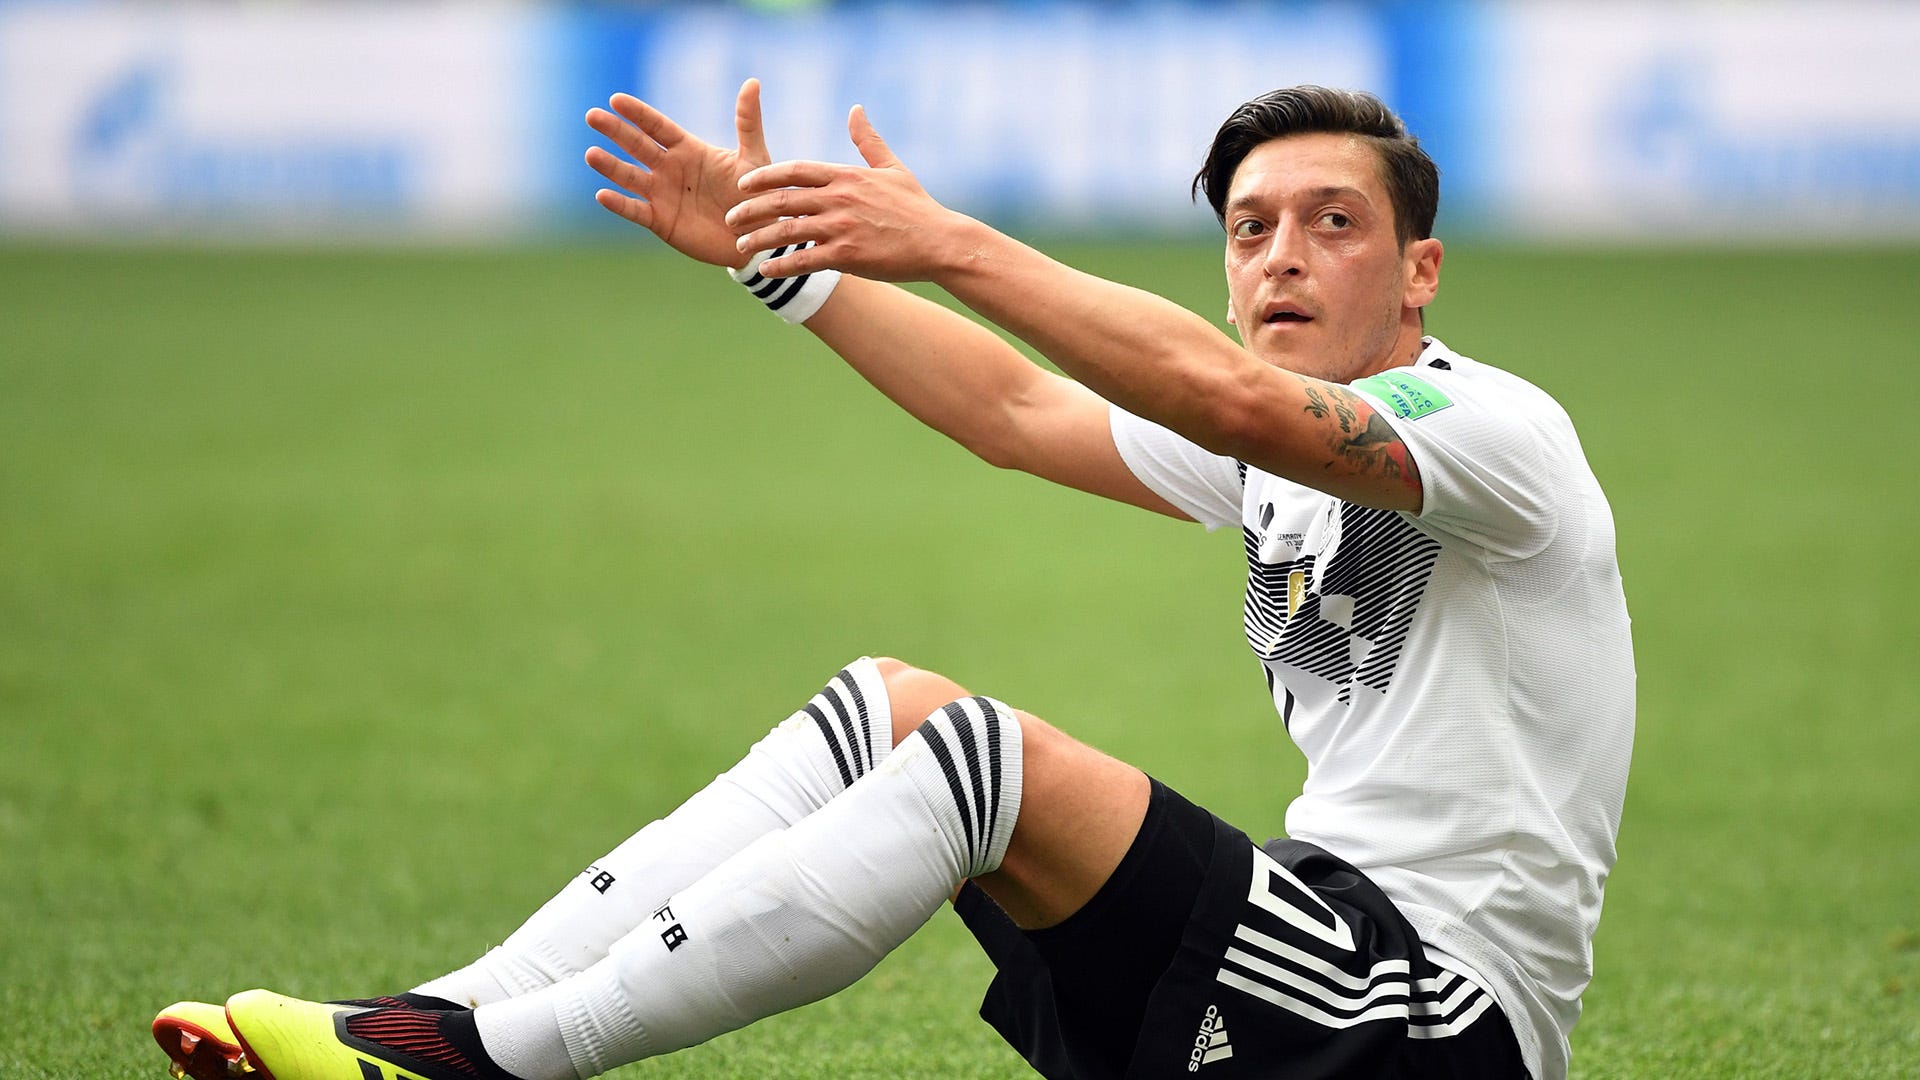 Germany vs south korea mesut ozil is one of the best players in the world